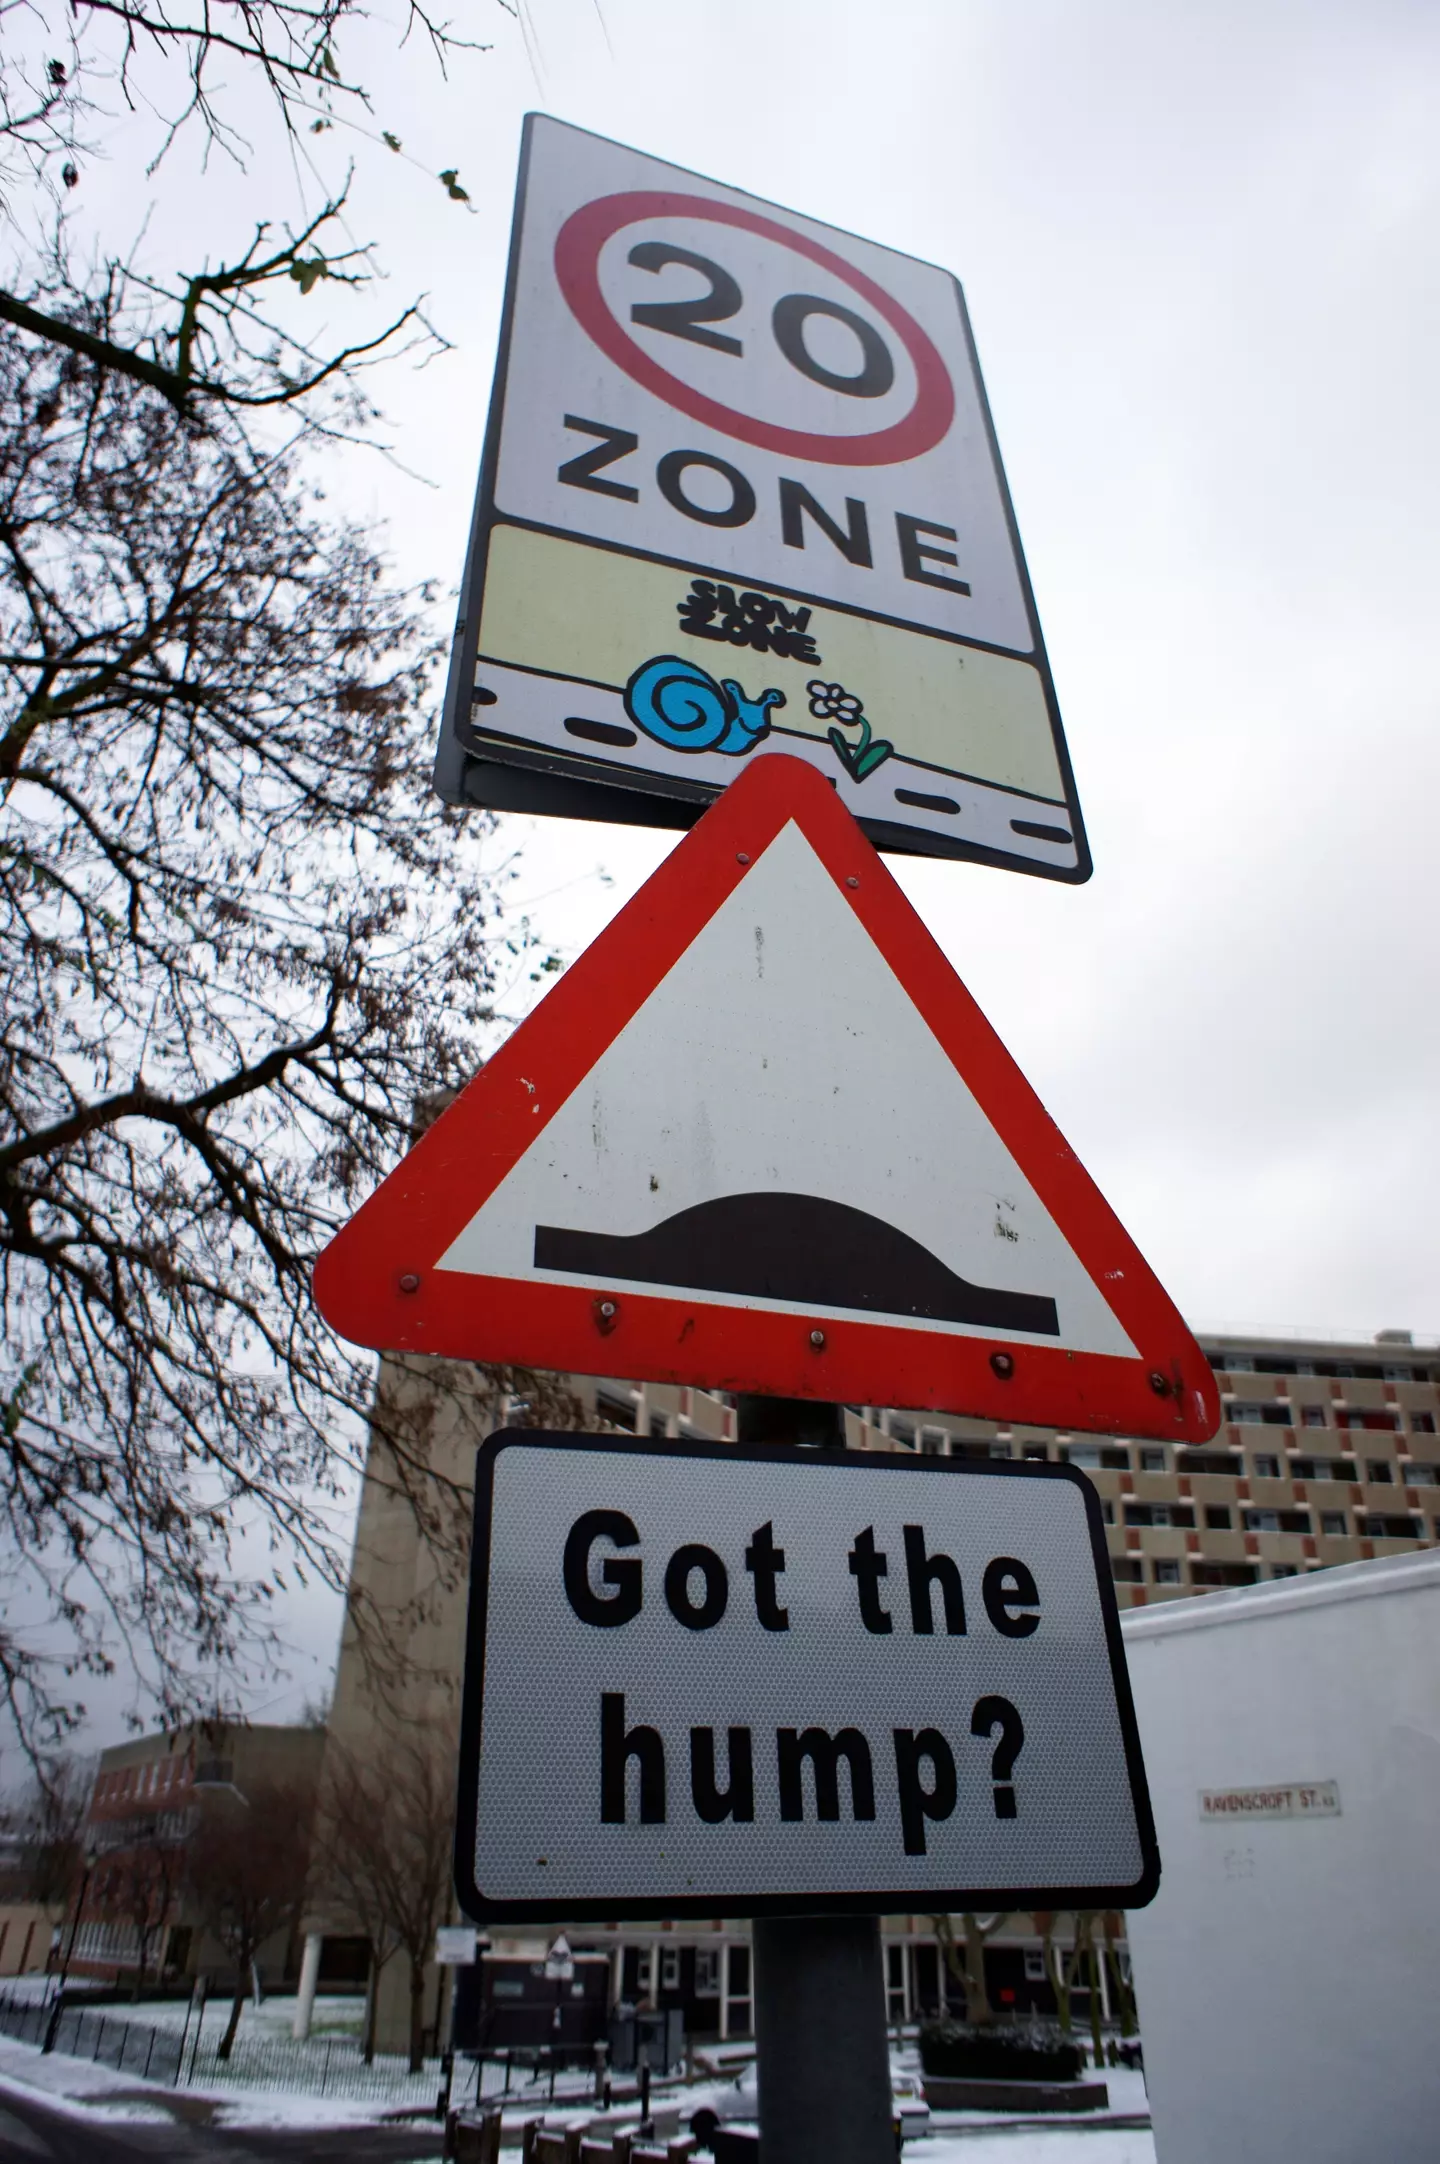 Road signs can sometimes be tricky to understand unless you've recently been studying for your theory test.